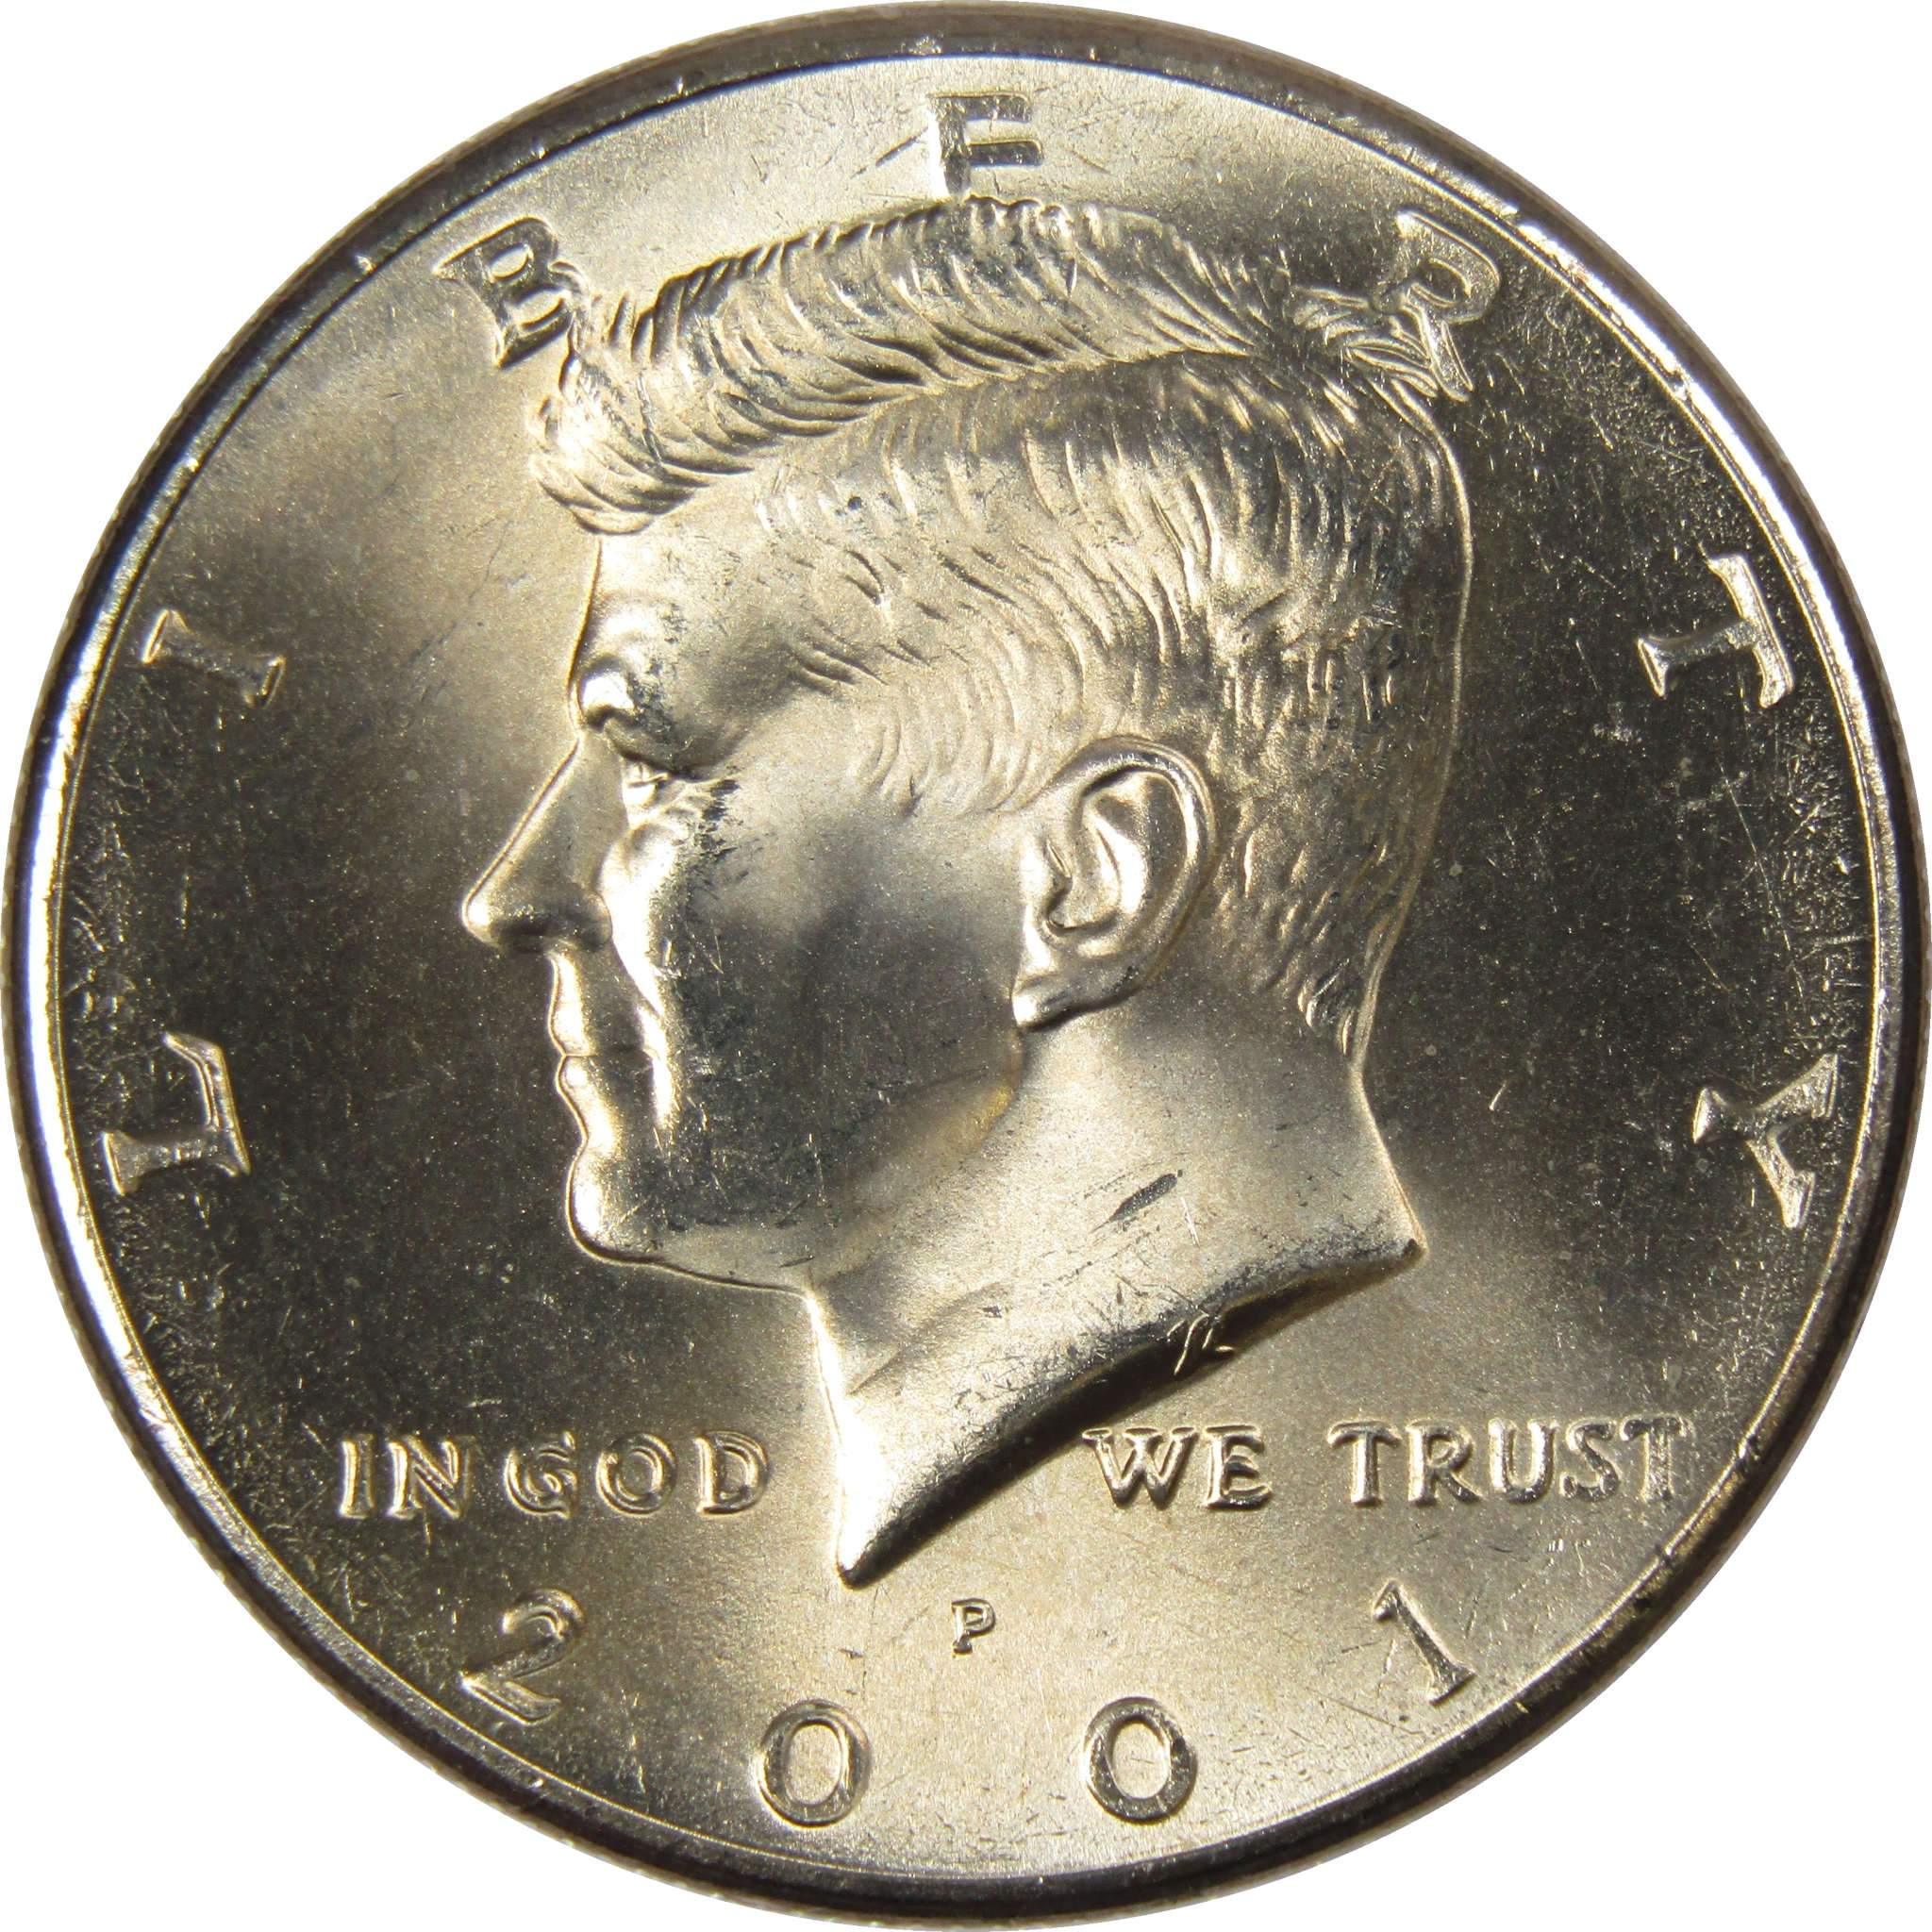 2001 P Kennedy Half Dollar BU Uncirculated Mint State 50c US Coin Collectible